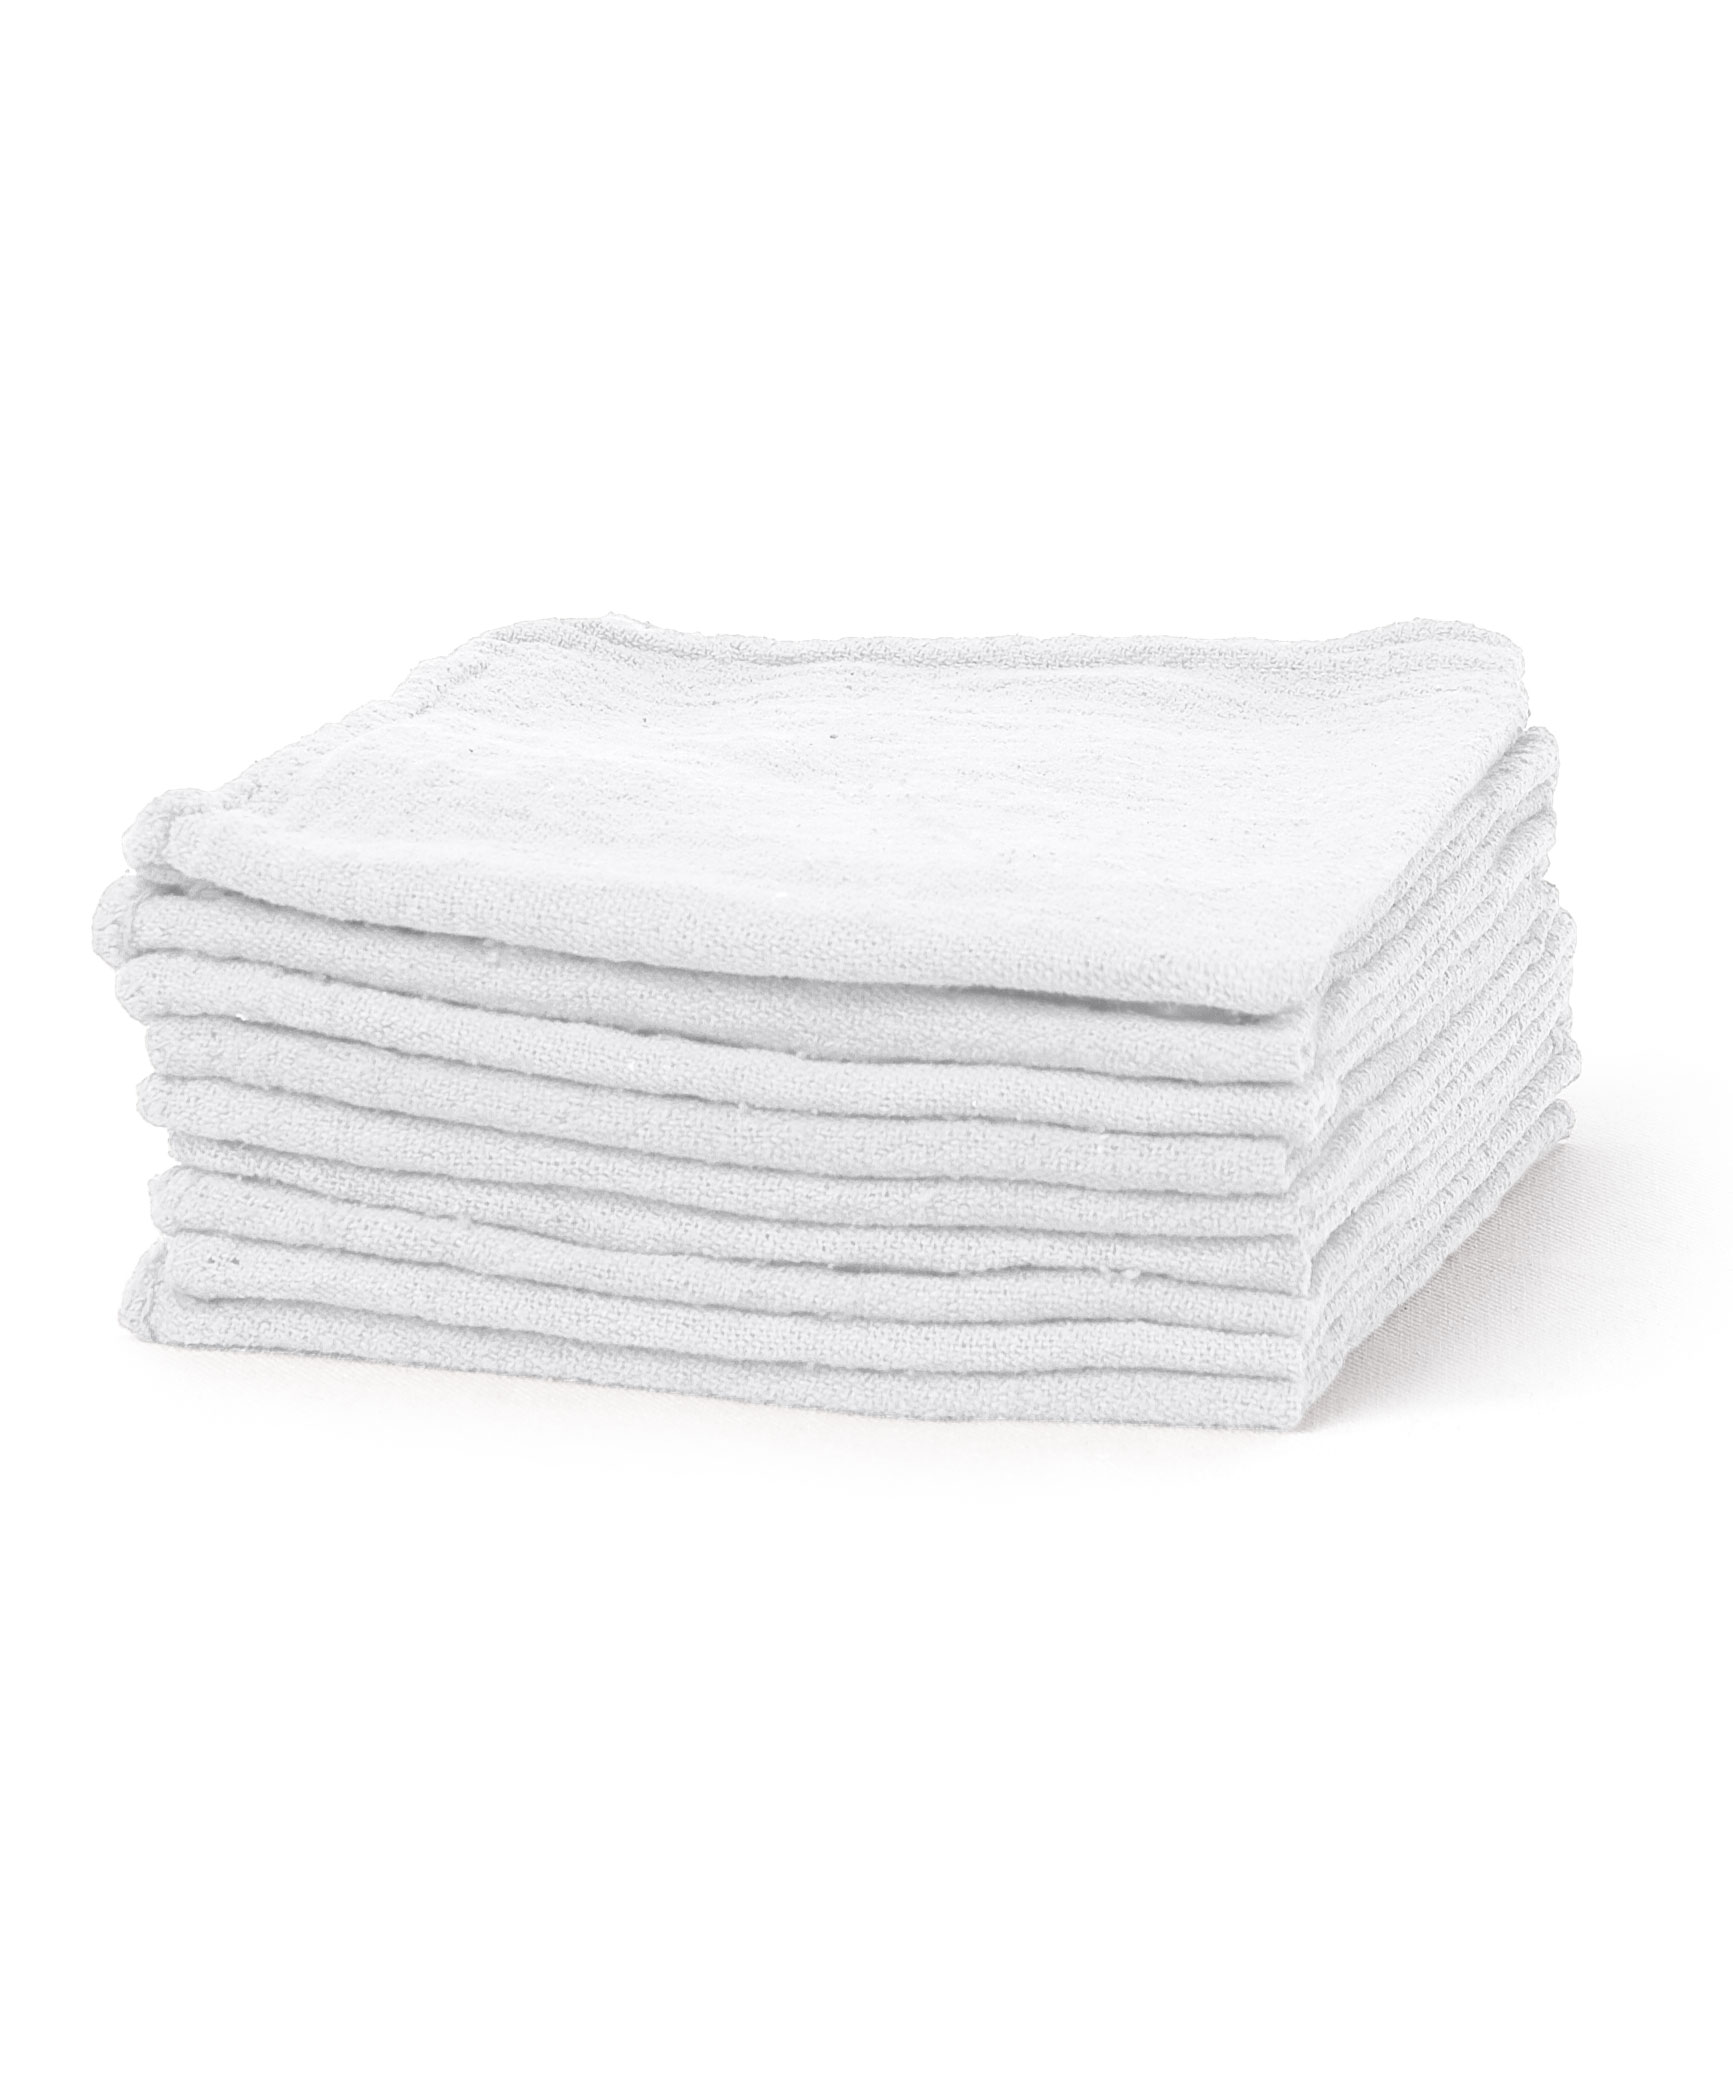 UniFirst Terry Cloths Towel Service with Laundering, Pickup and Delivery